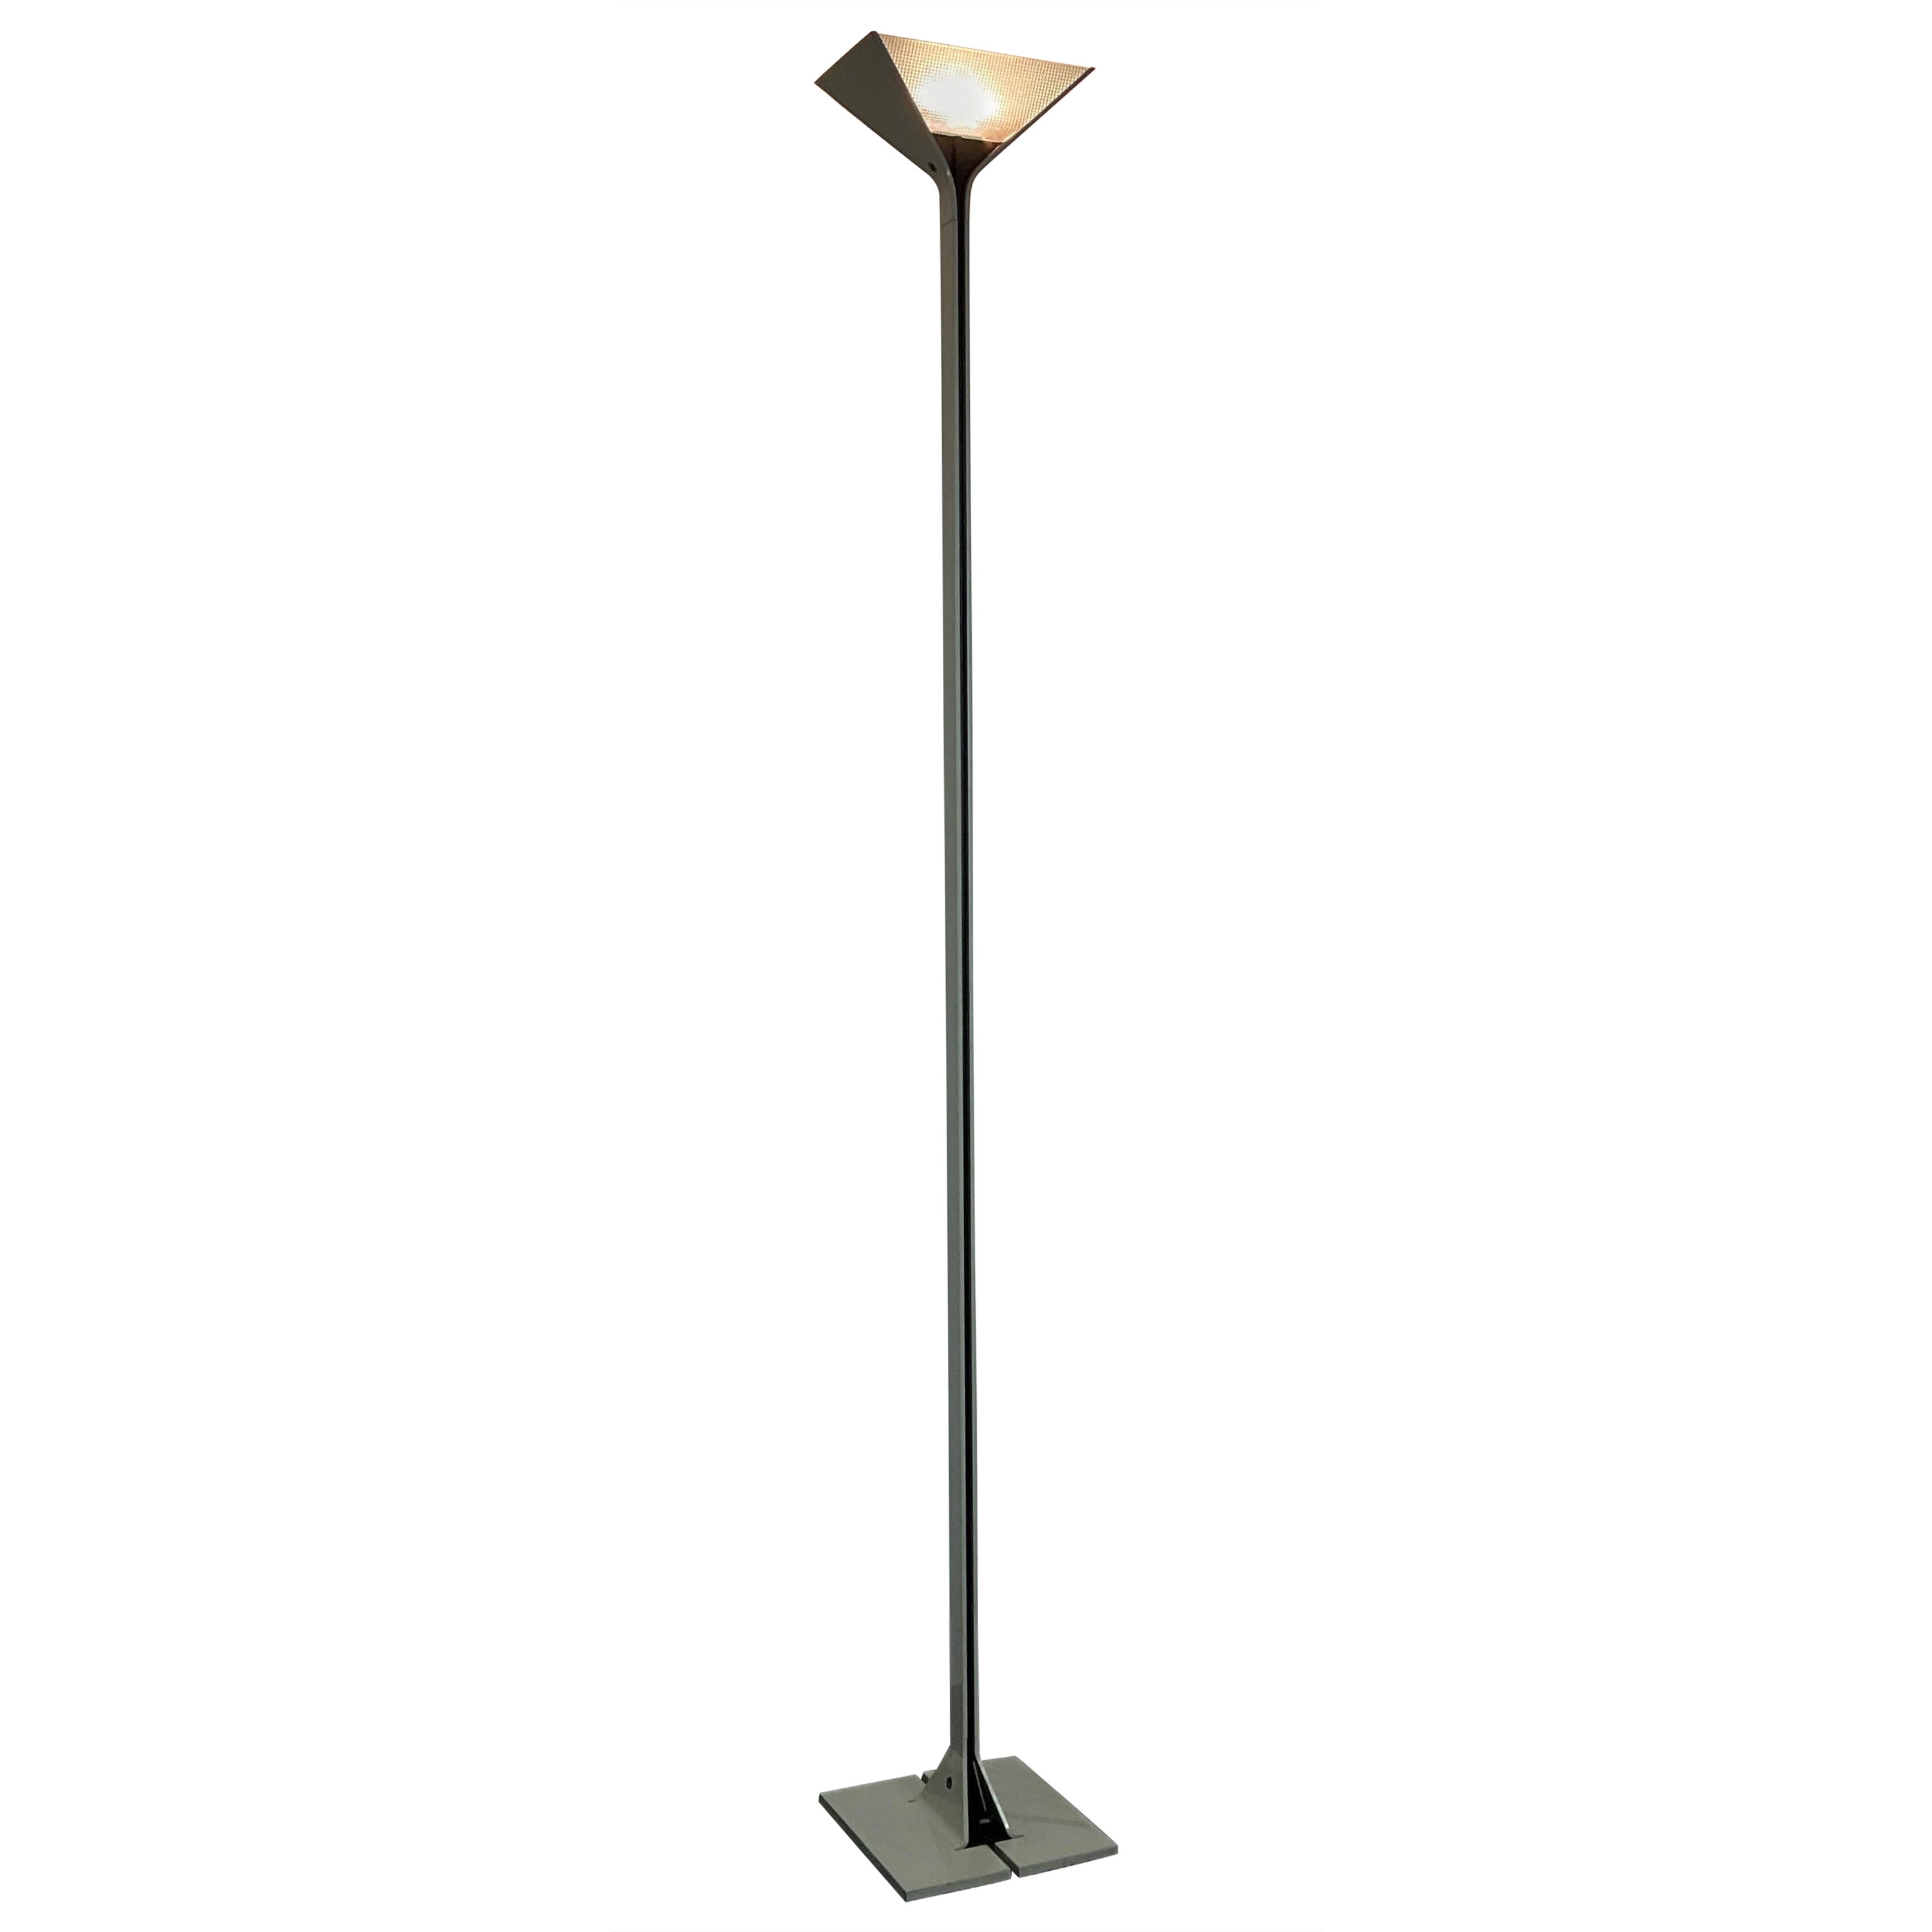 Afra Papillona and Tobia shoe  seedling lamp for FLOS For Sale